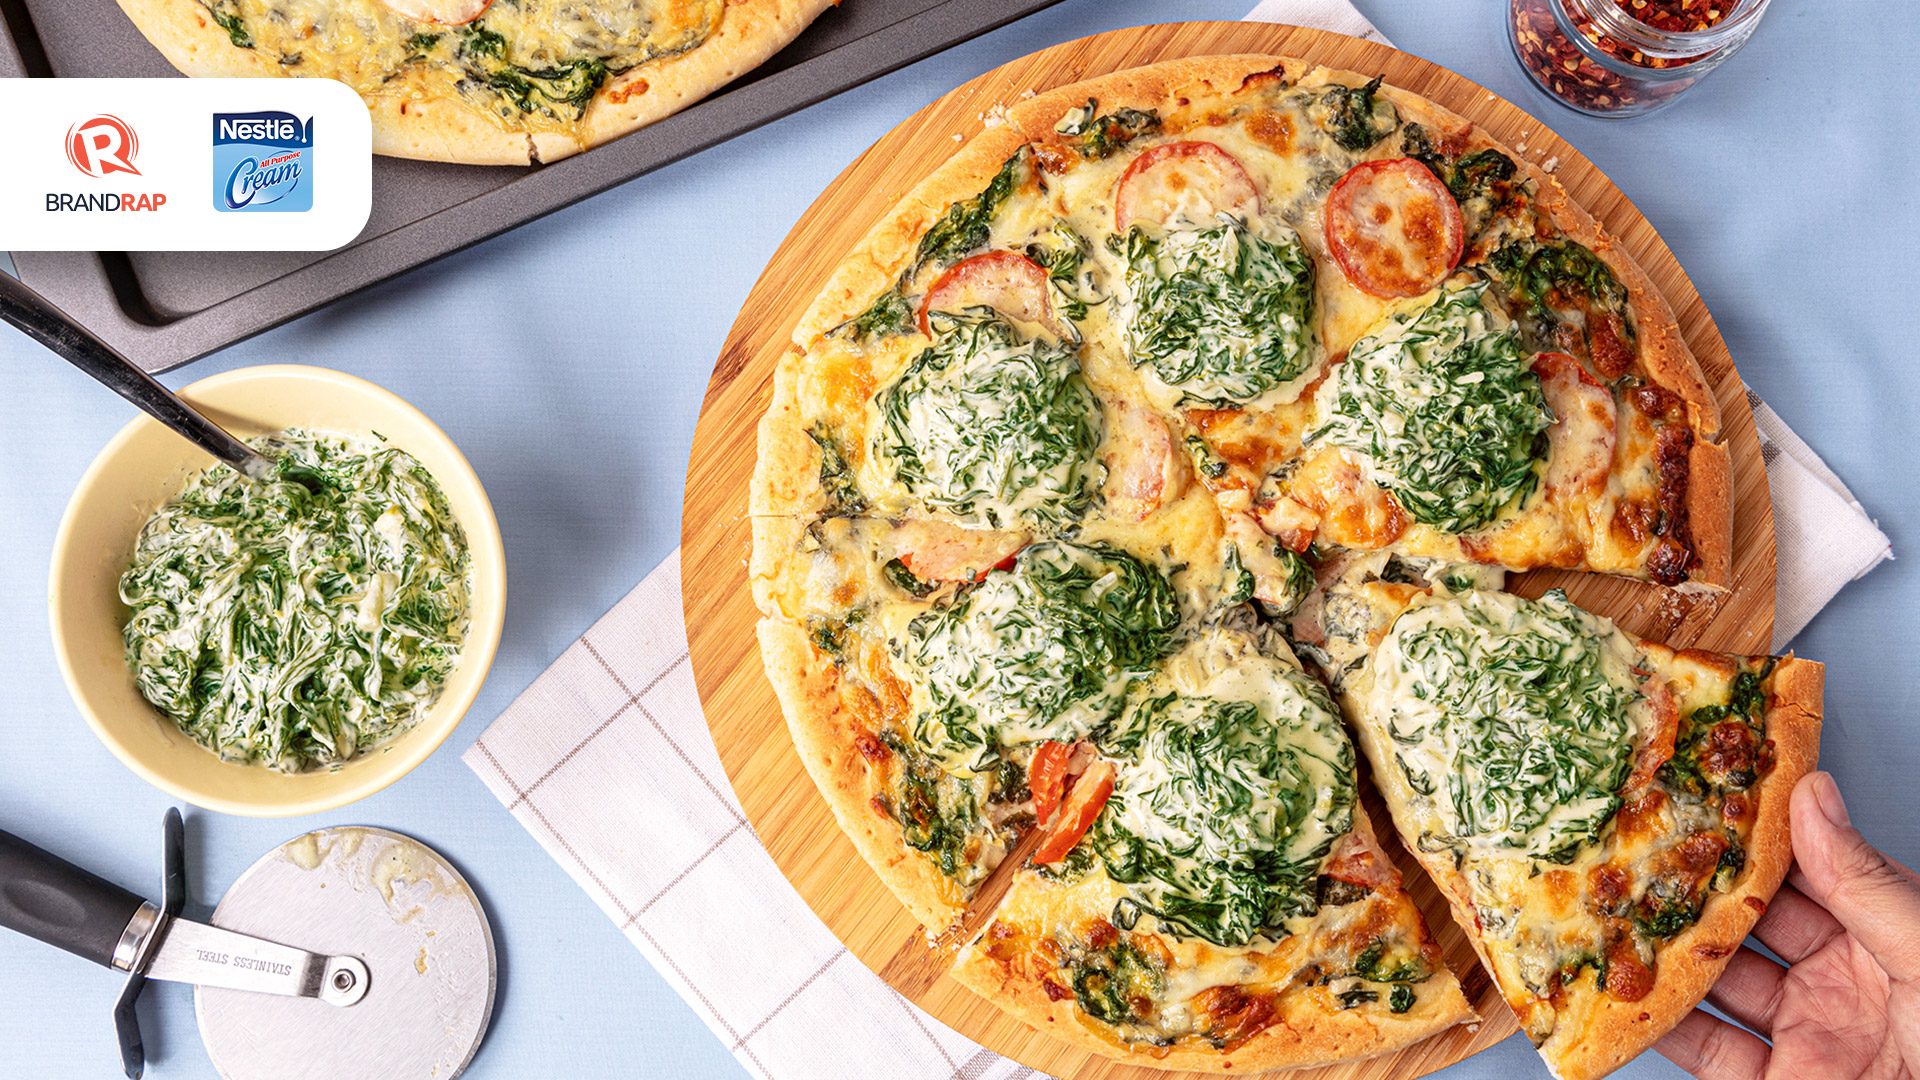 [WATCH] How to create your own creamy spinach pizza for movie nights with the fam